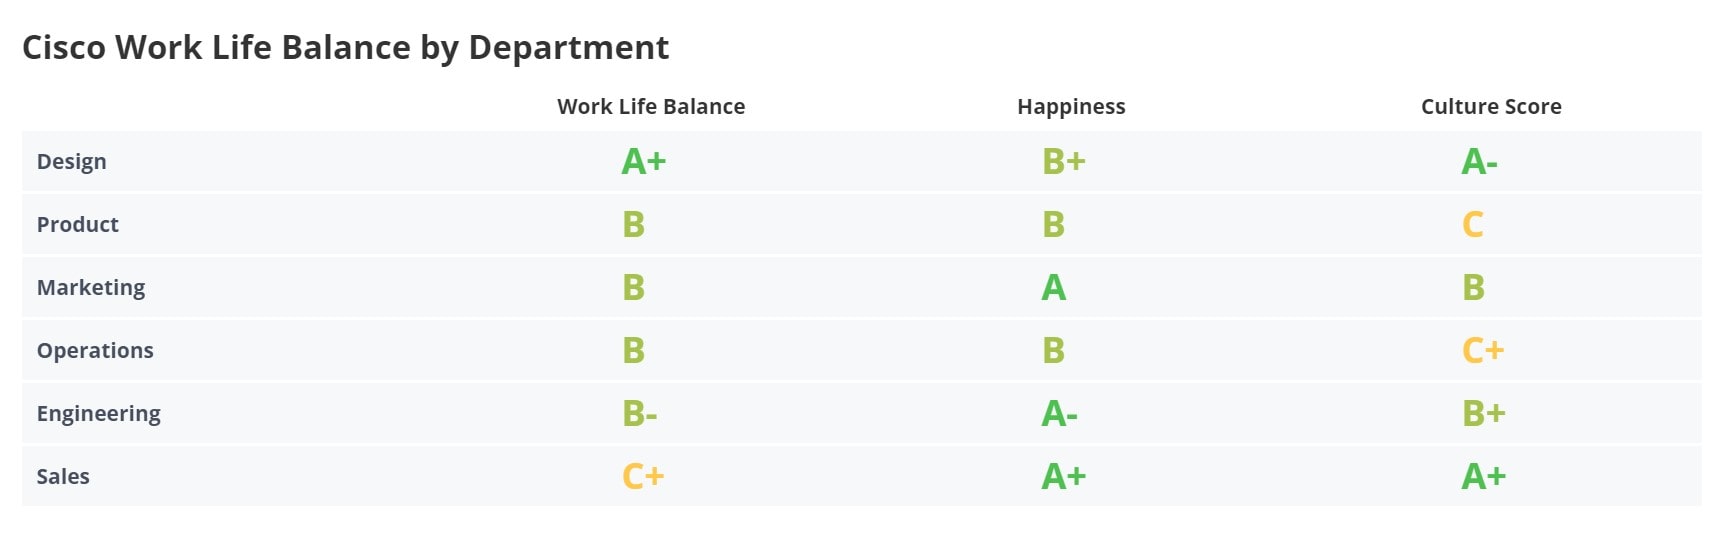 Cisco Work-Life Balance By Deparment